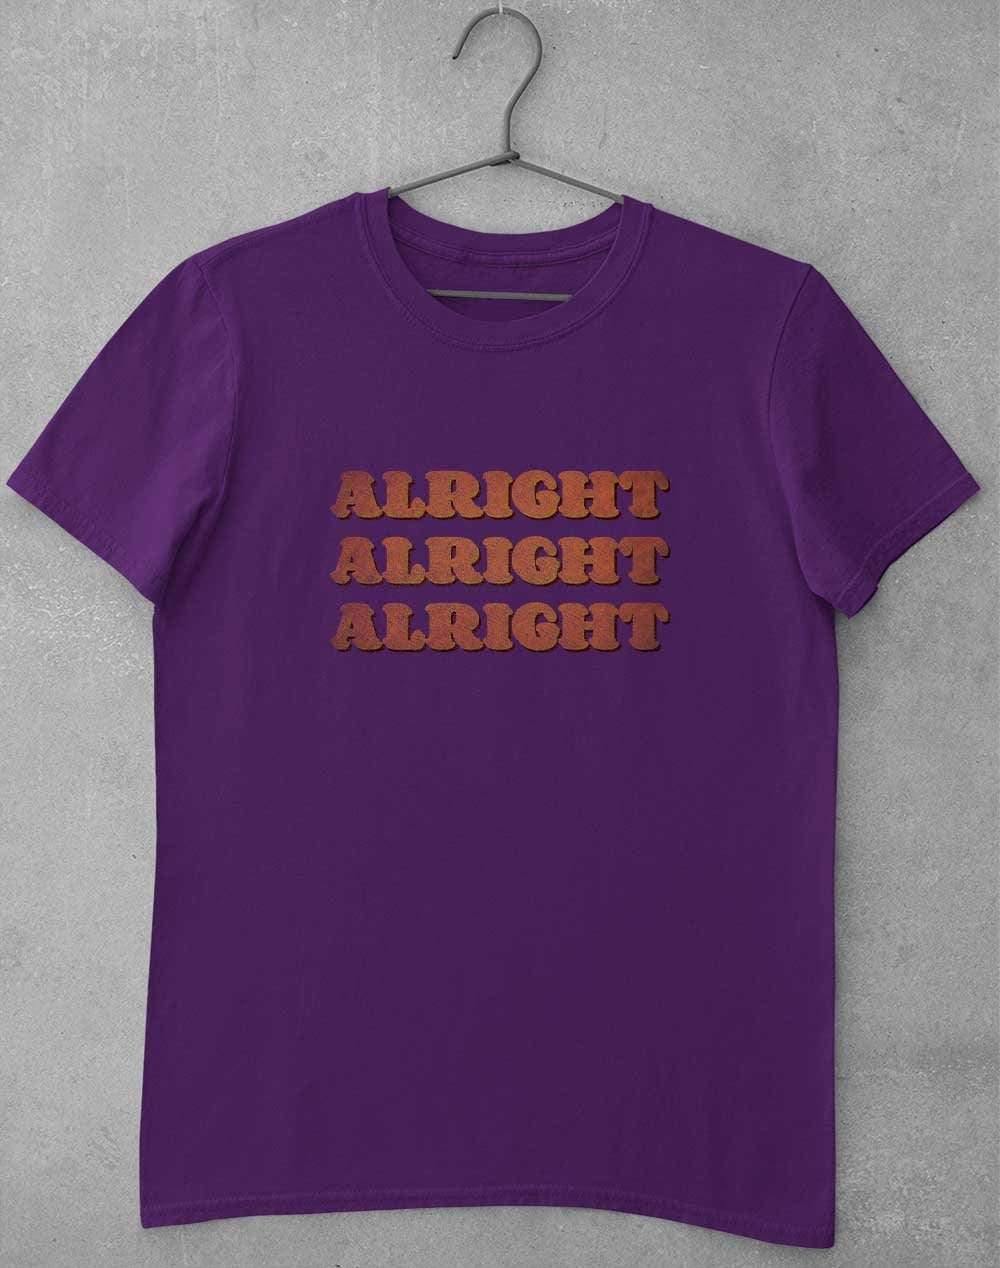 Alright Alright Alright T-Shirt S / Purple  - Off World Tees